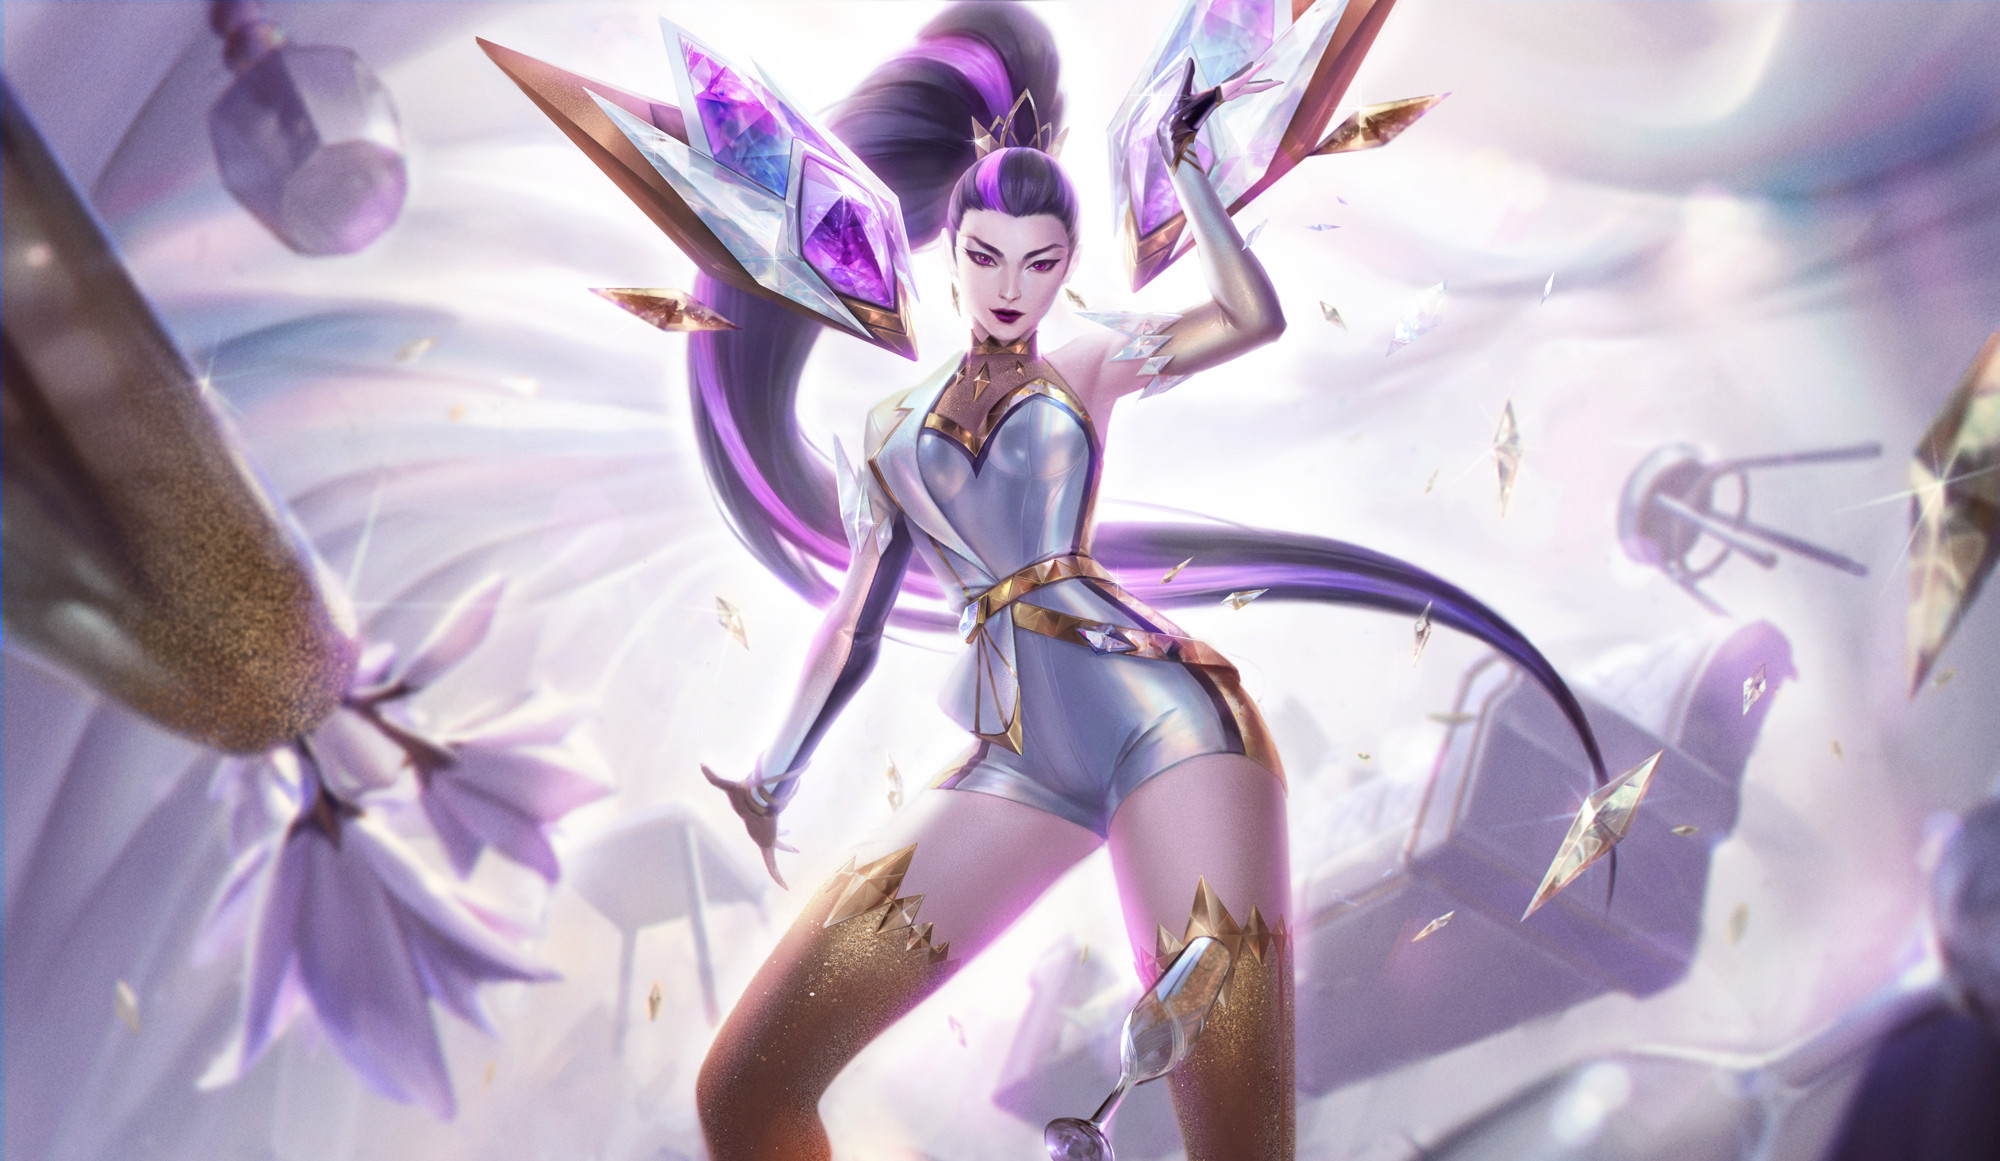 Bo Chen Drawing League Of Legends Women KaiSa League Of Legends Long Hair Ponytail Crystal Purple Ey 2000x1161